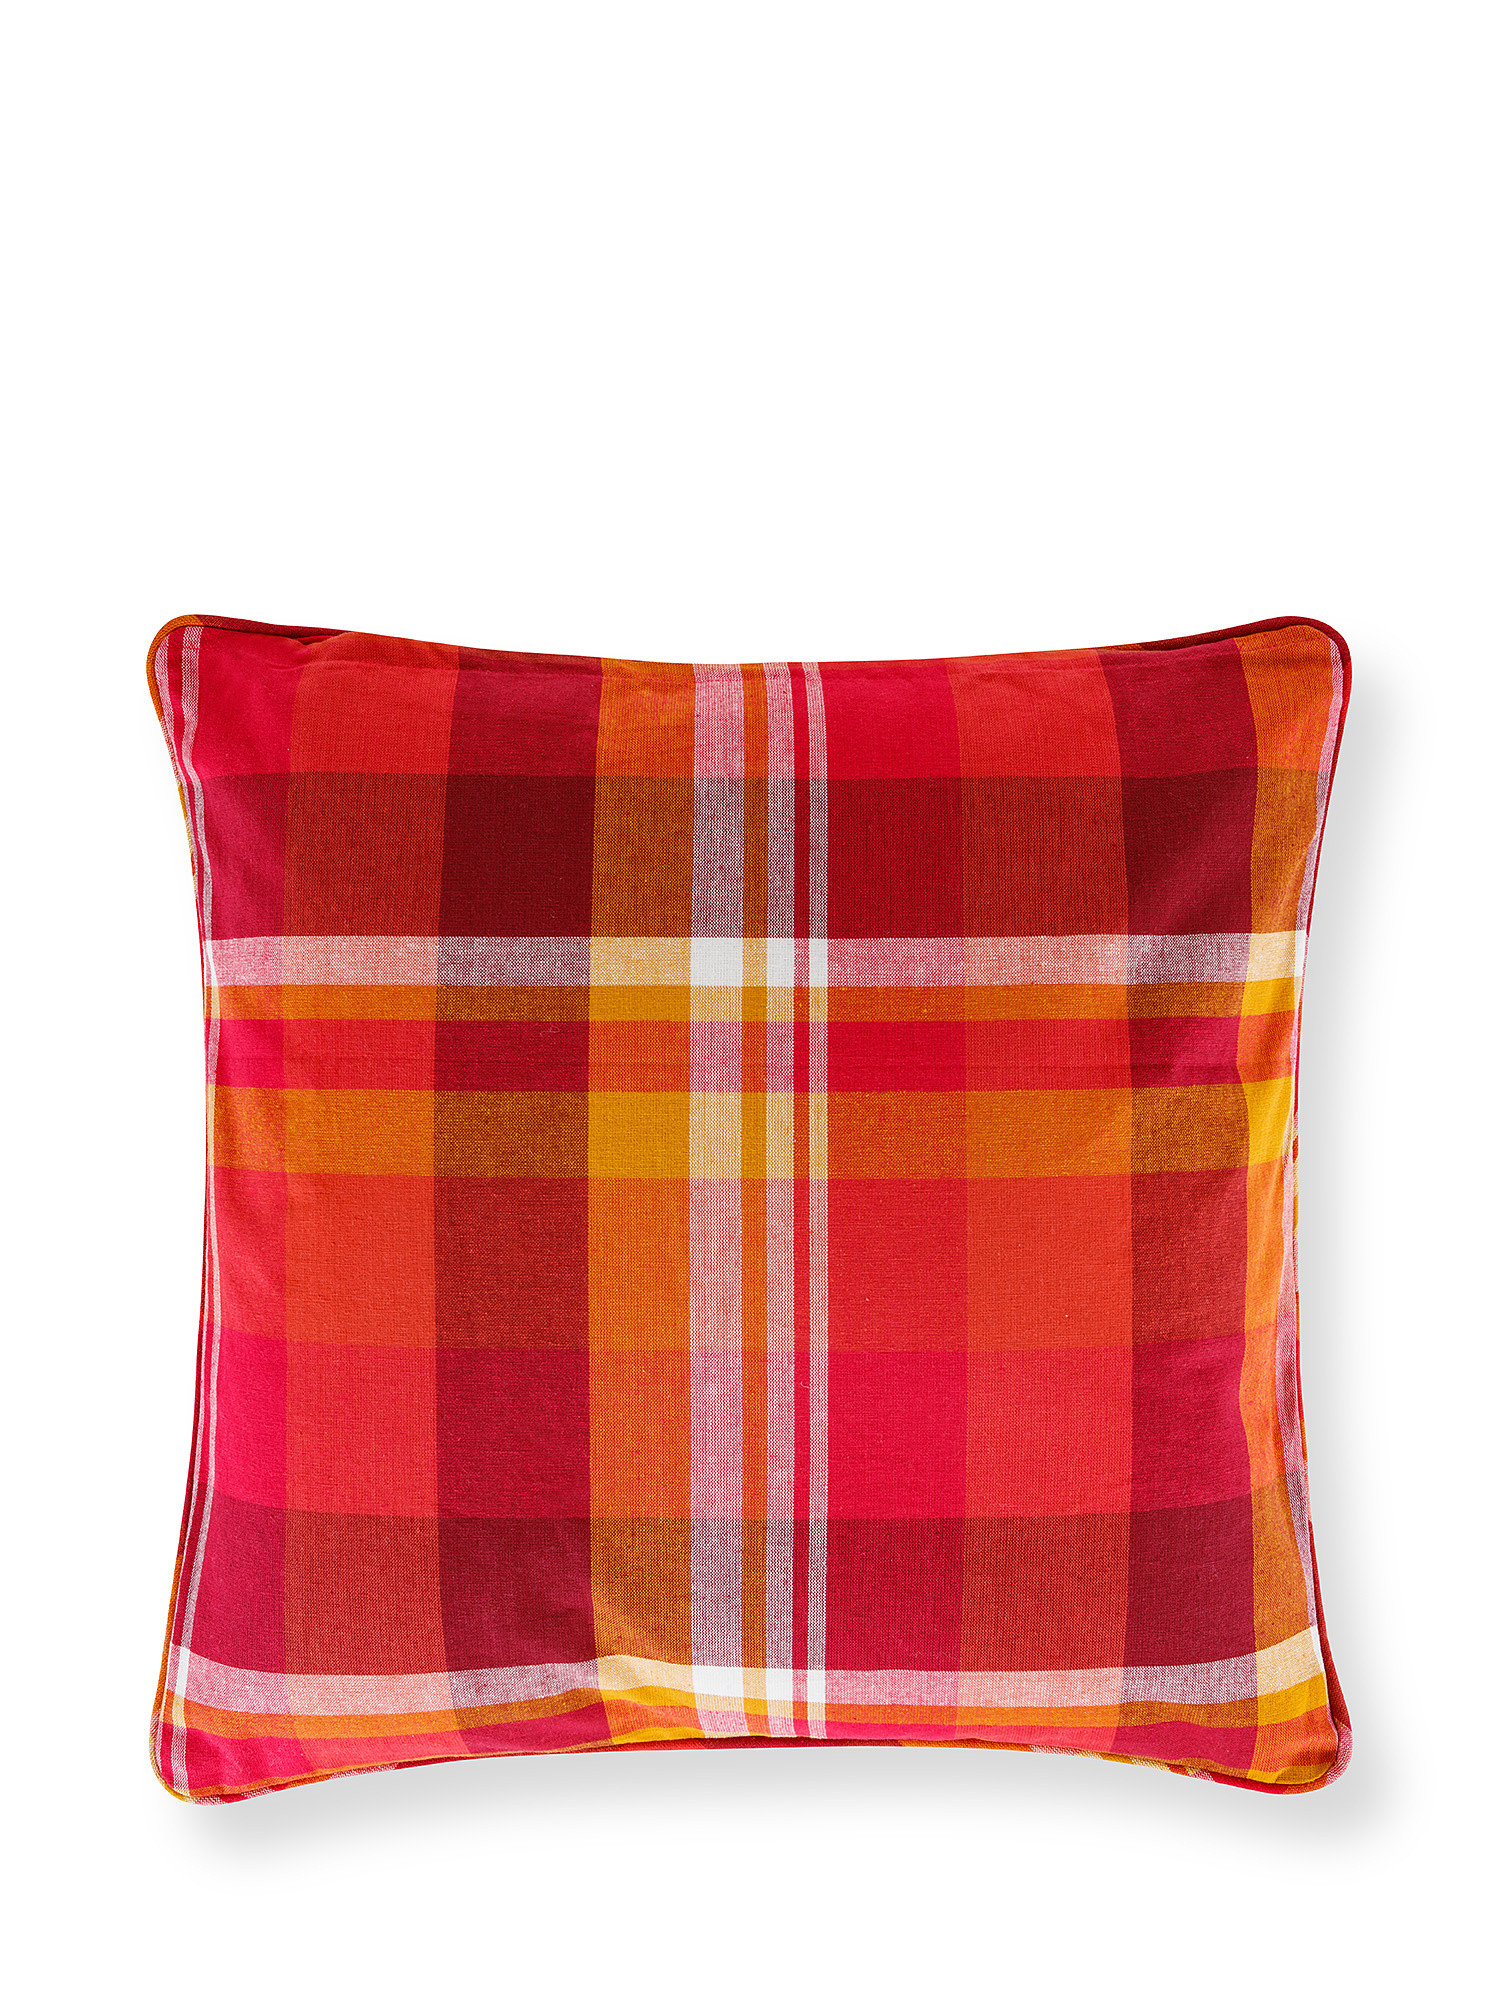 Cotton cushion with check pattern 45x45cm, Red, large image number 1